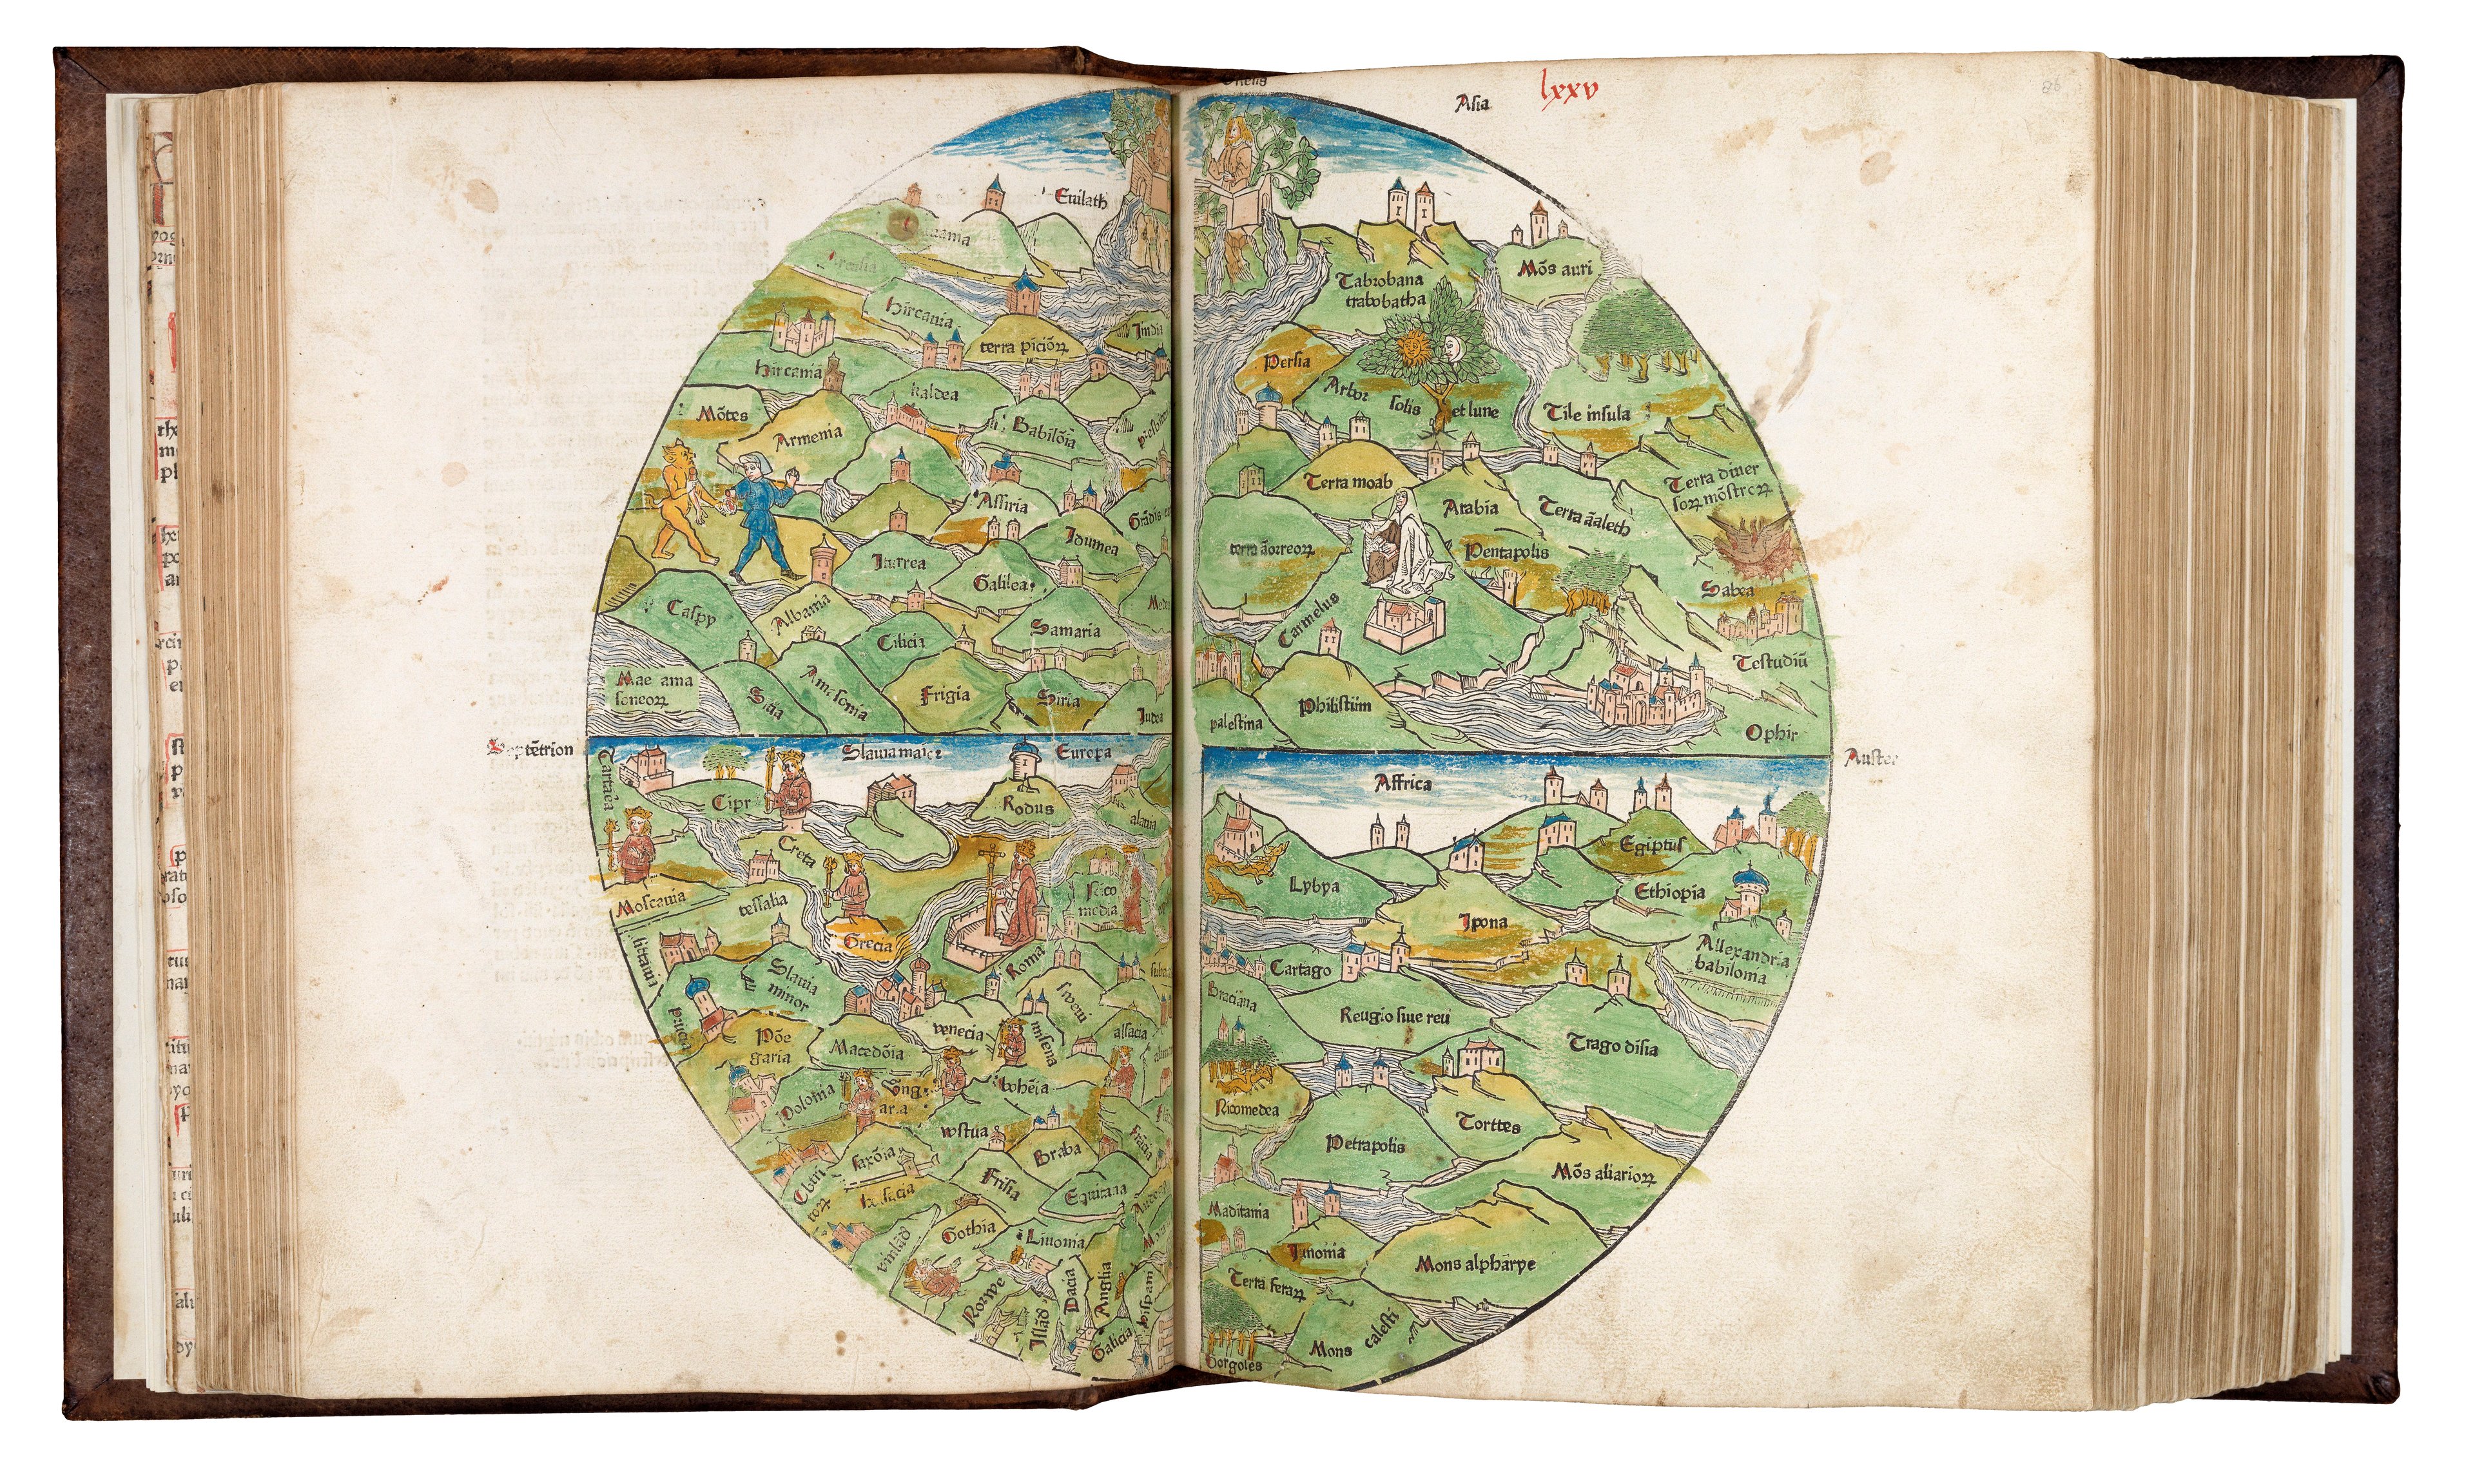 A thick, old book open at the page of a round world map. The map is from a woodblock print and is brightly coloured, mostly in green. It features many hills, streams, placenames, and figures from Biblical legends as well as Medieval myth. 